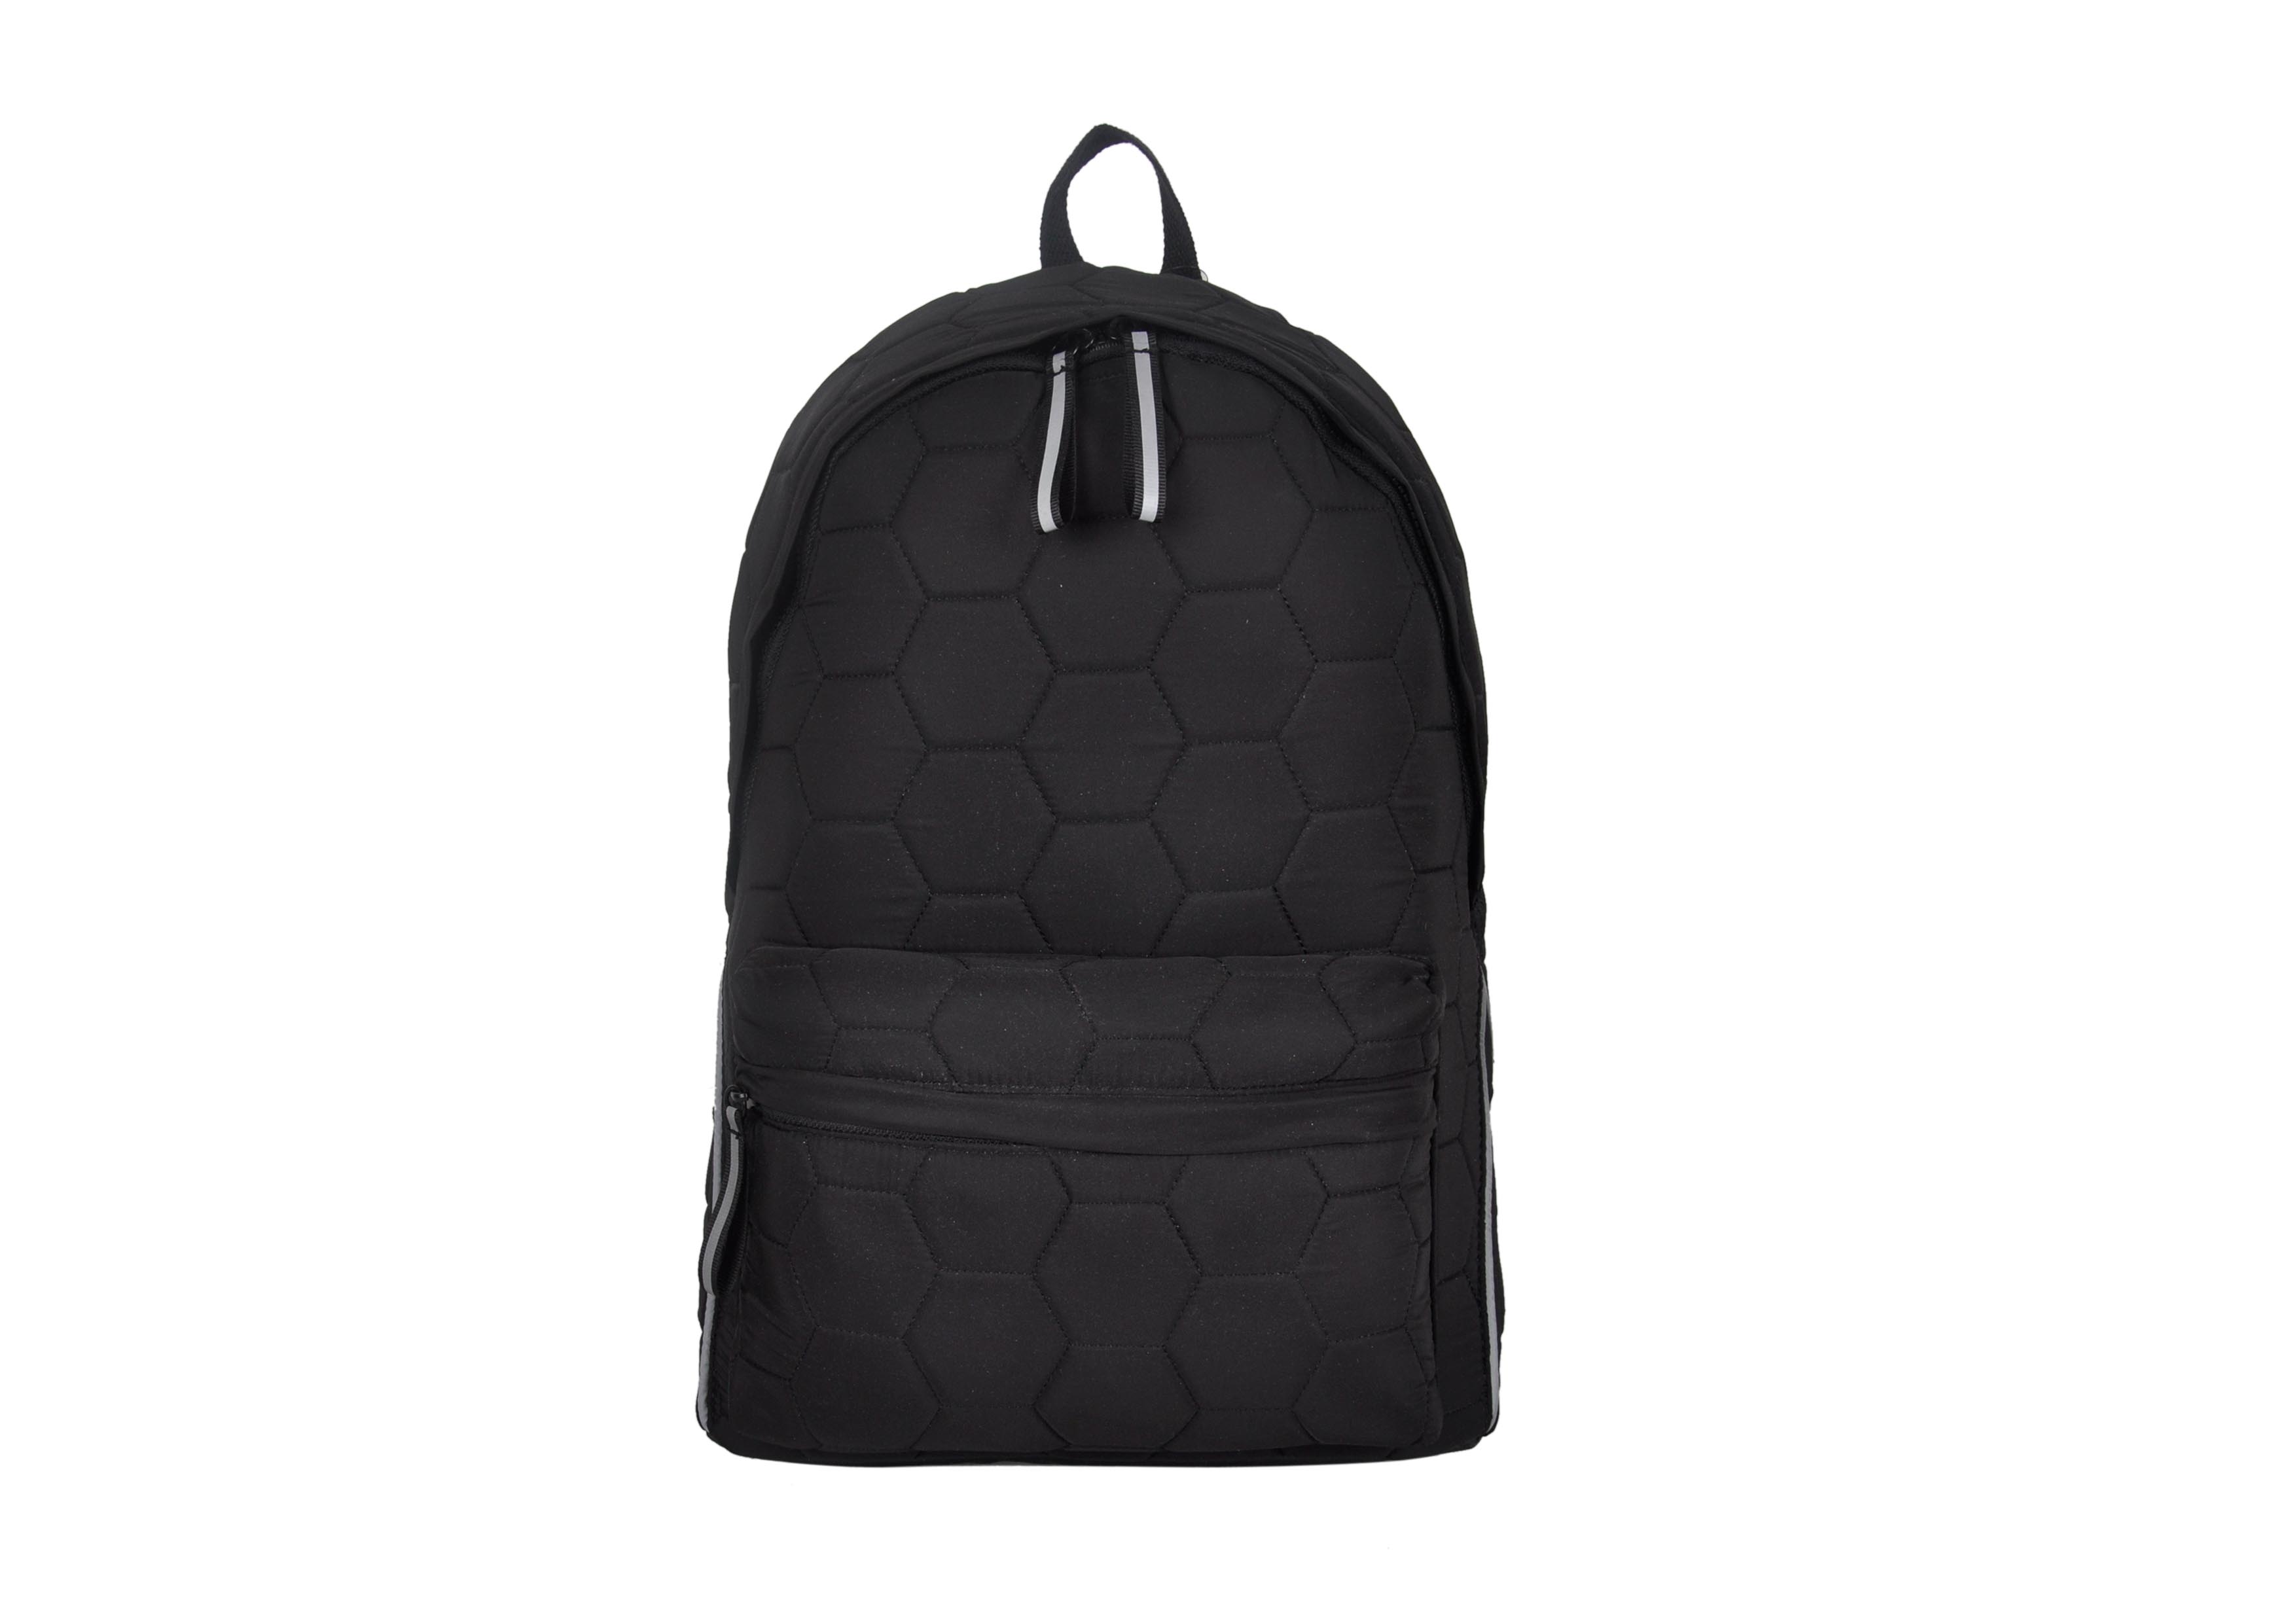 soft material backpack 